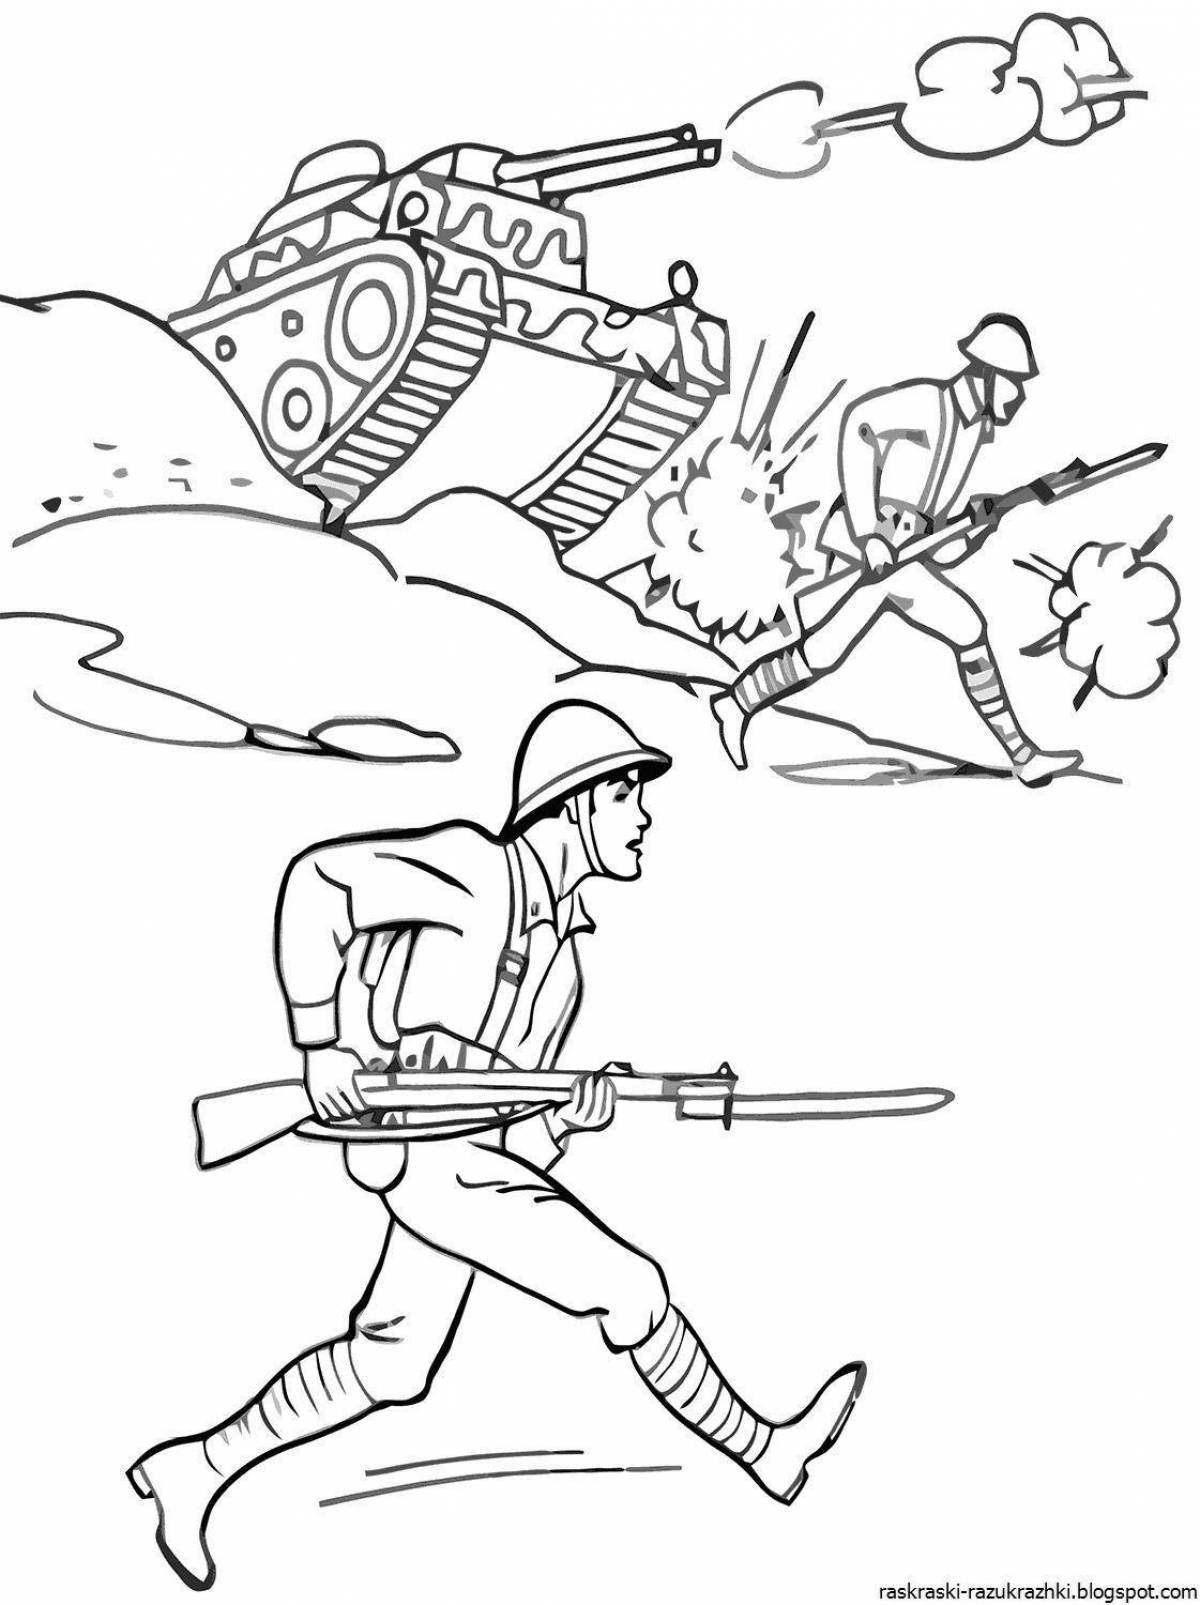 Amazing world war 2 coloring page